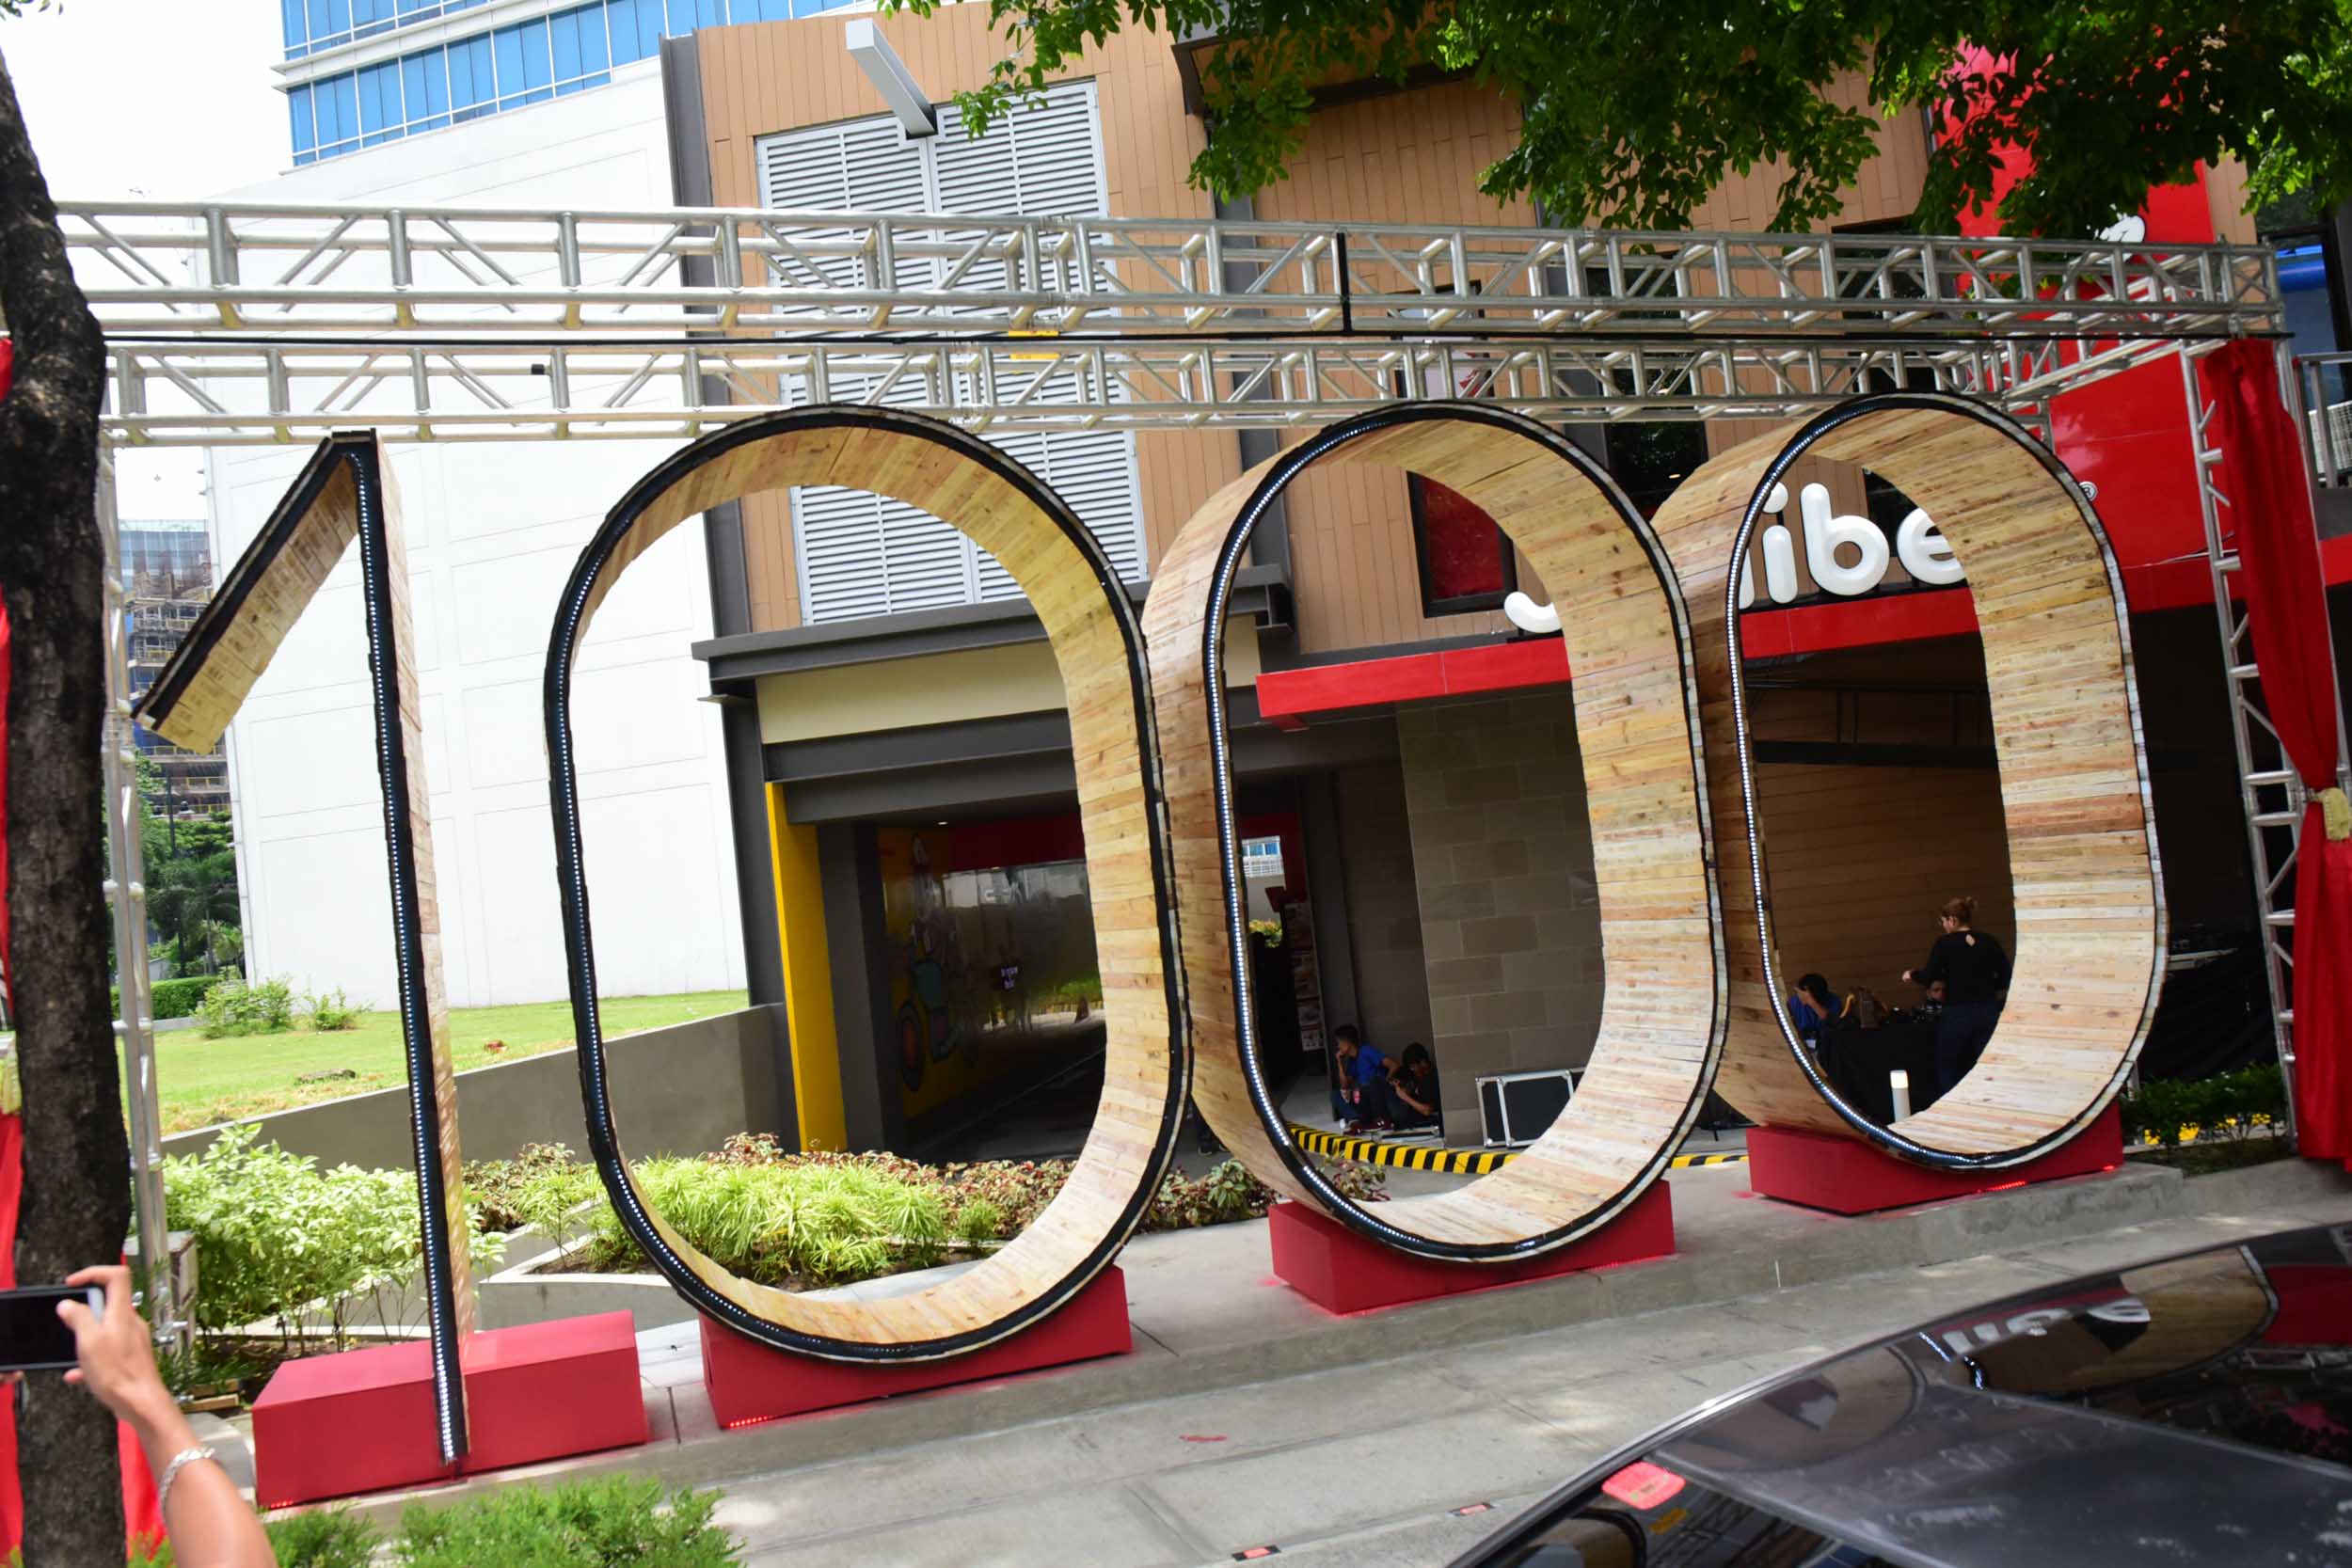 IN PHOTOS: Inside Jollibee's 1,000th store